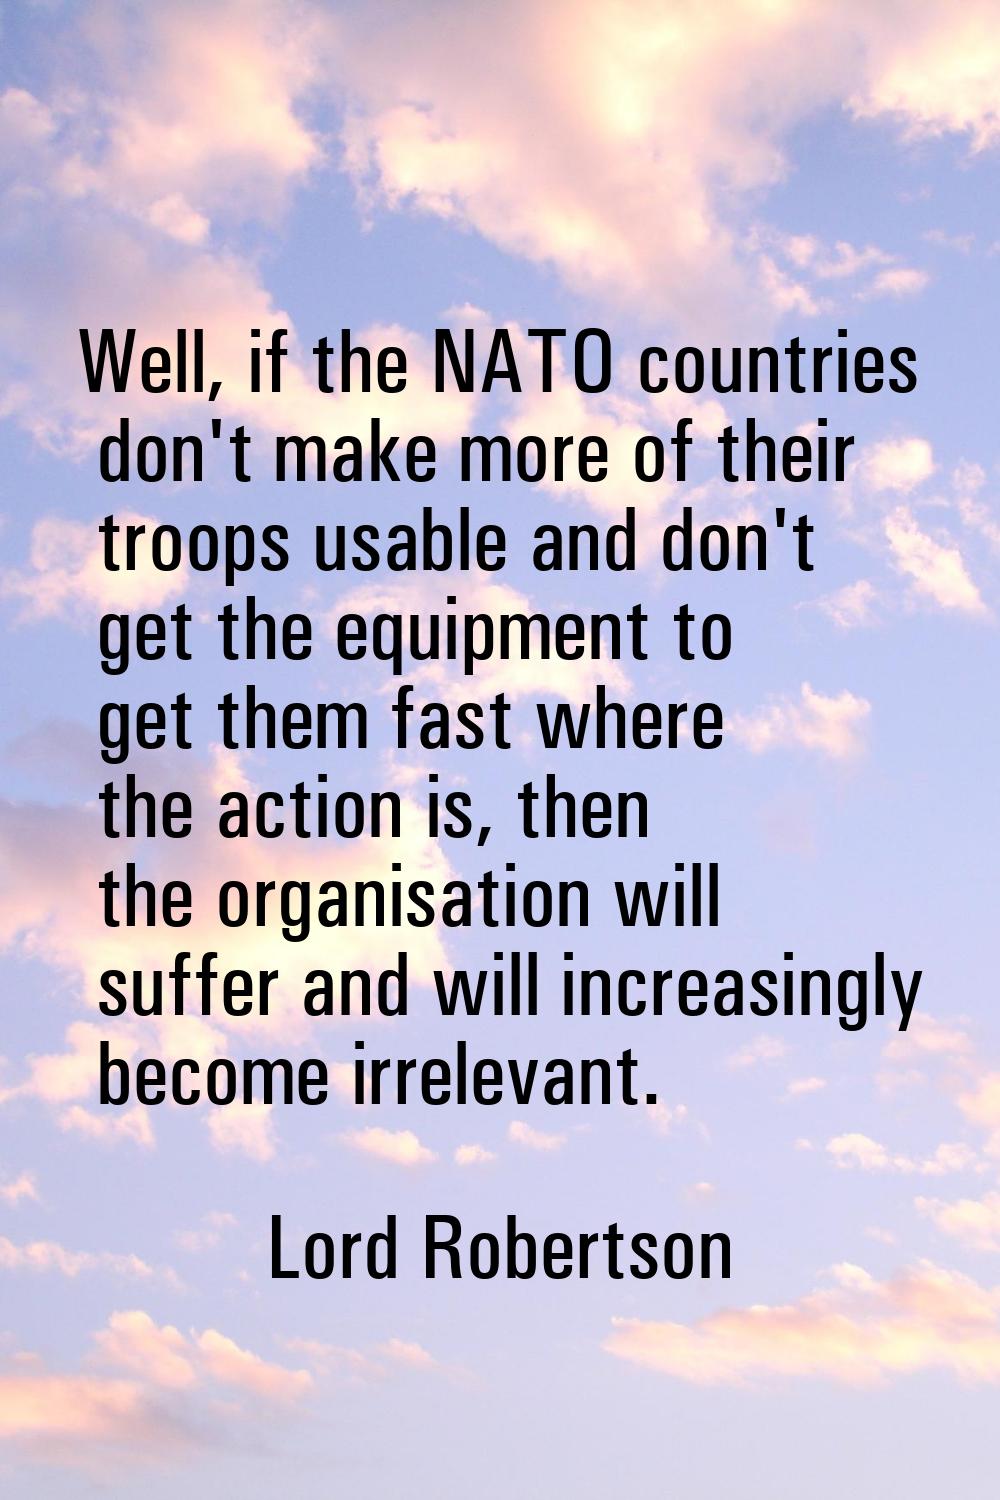 Well, if the NATO countries don't make more of their troops usable and don't get the equipment to g